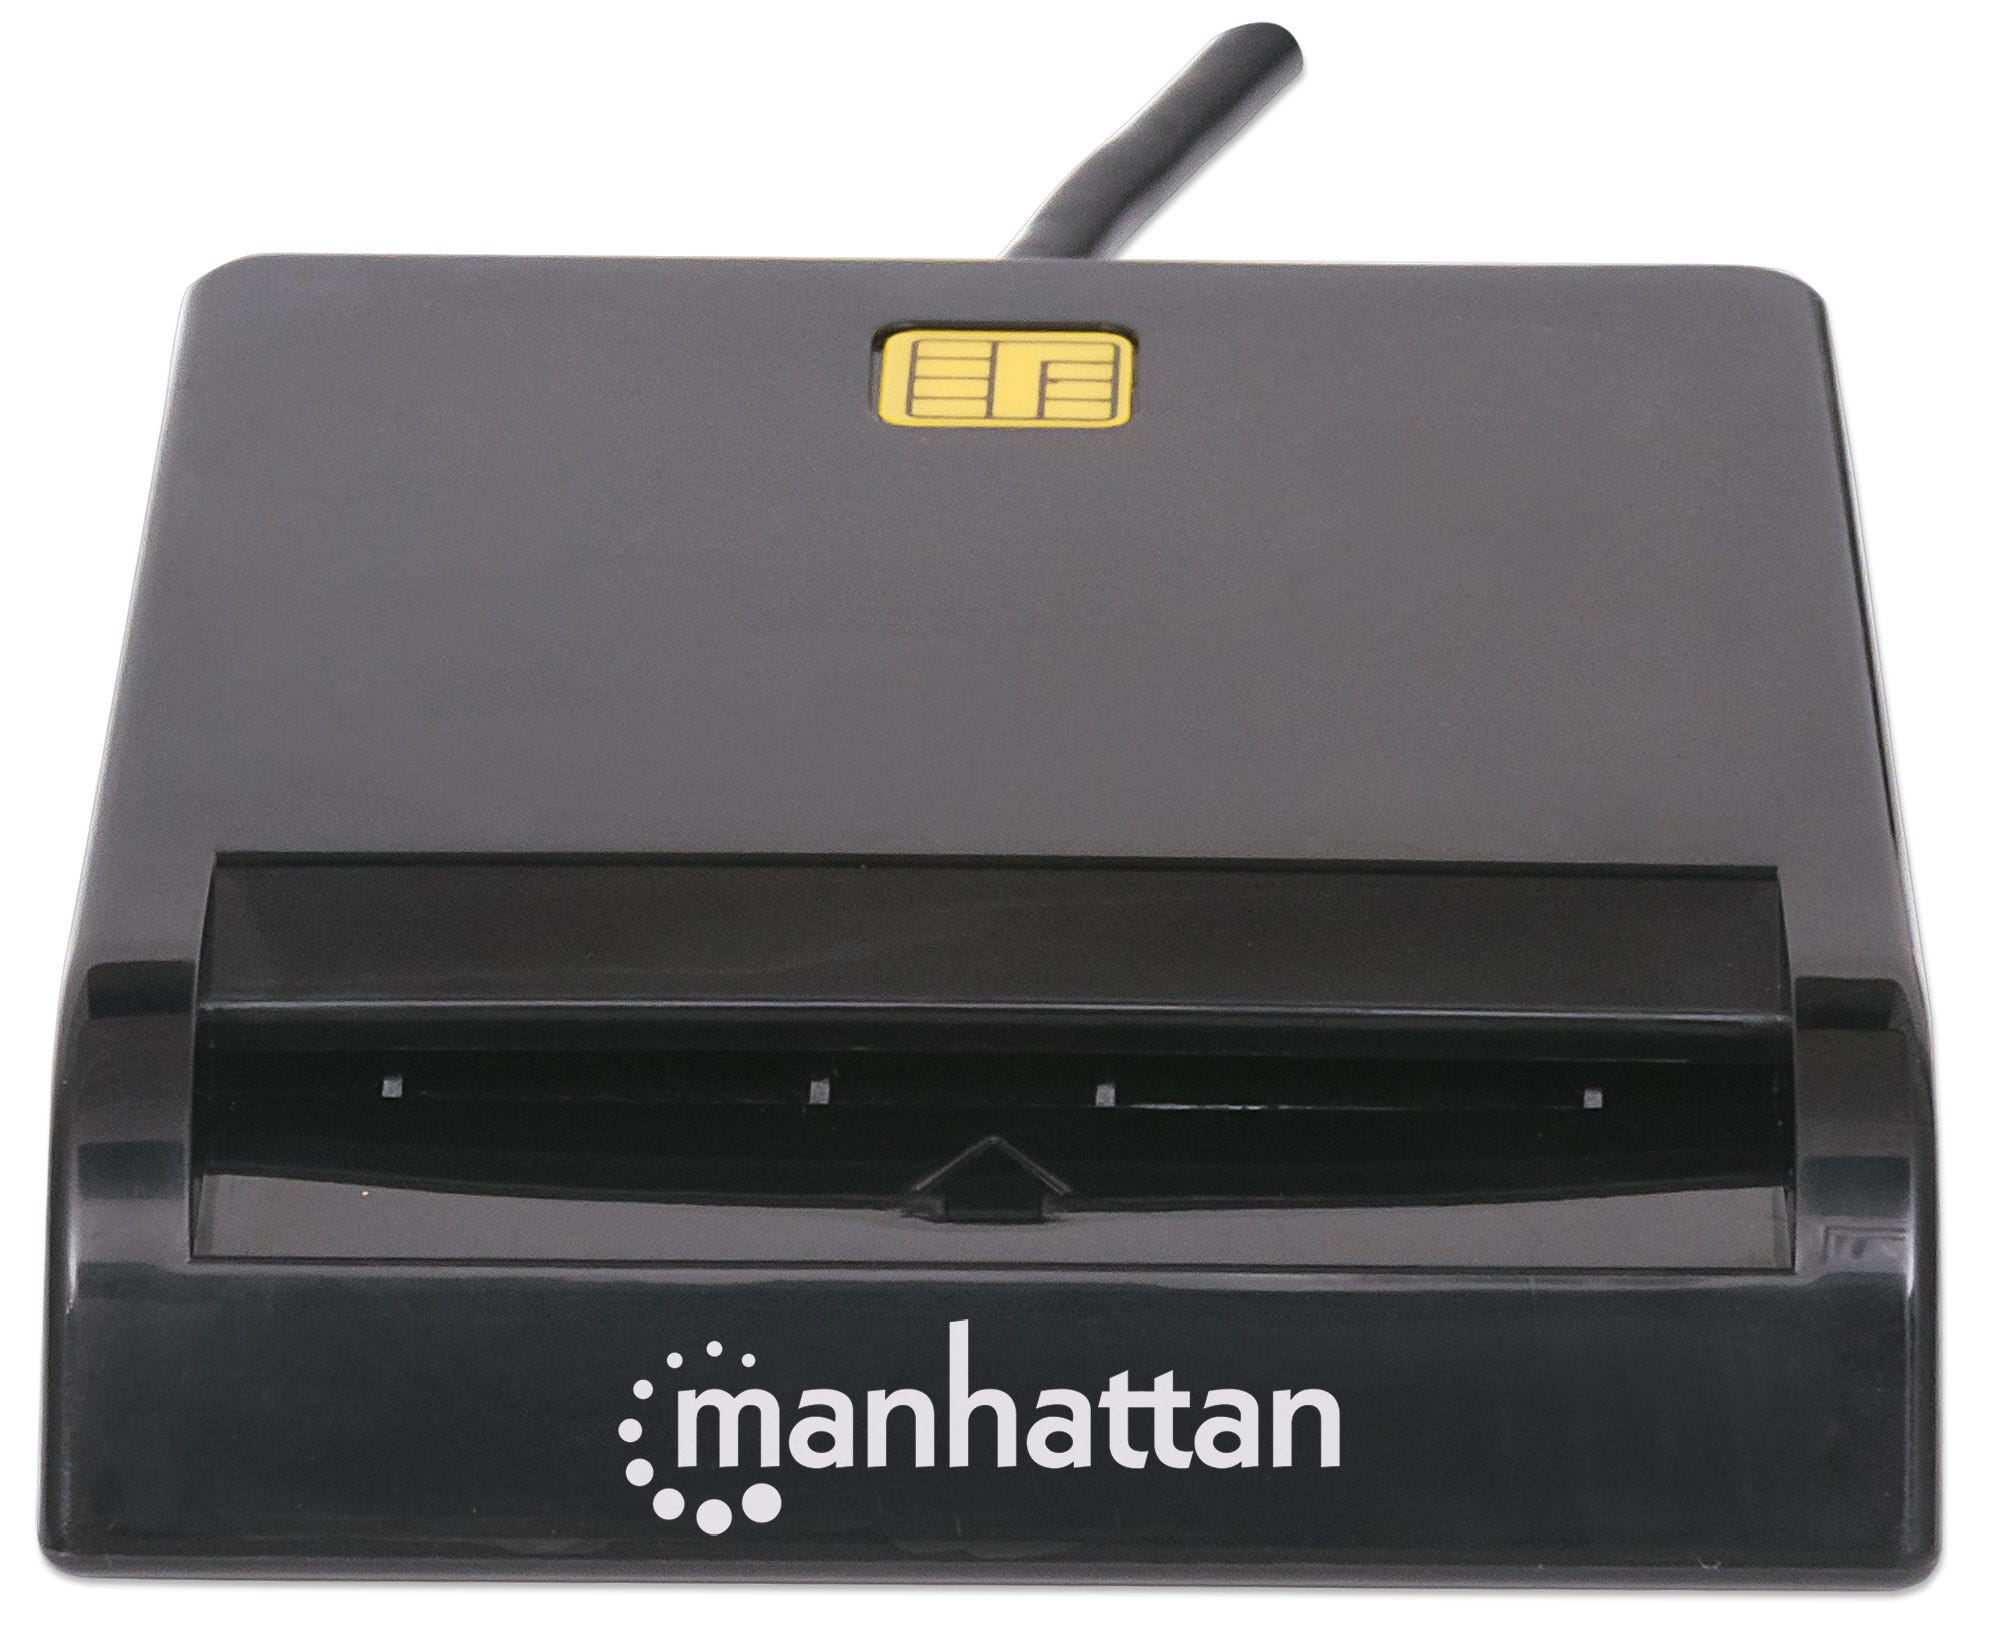 Manhattan USB-A Contact Smart Card Reader, 12 Mbps, Friction type compatible, External, Windows or Mac, Cable 105cm, Black, Blister